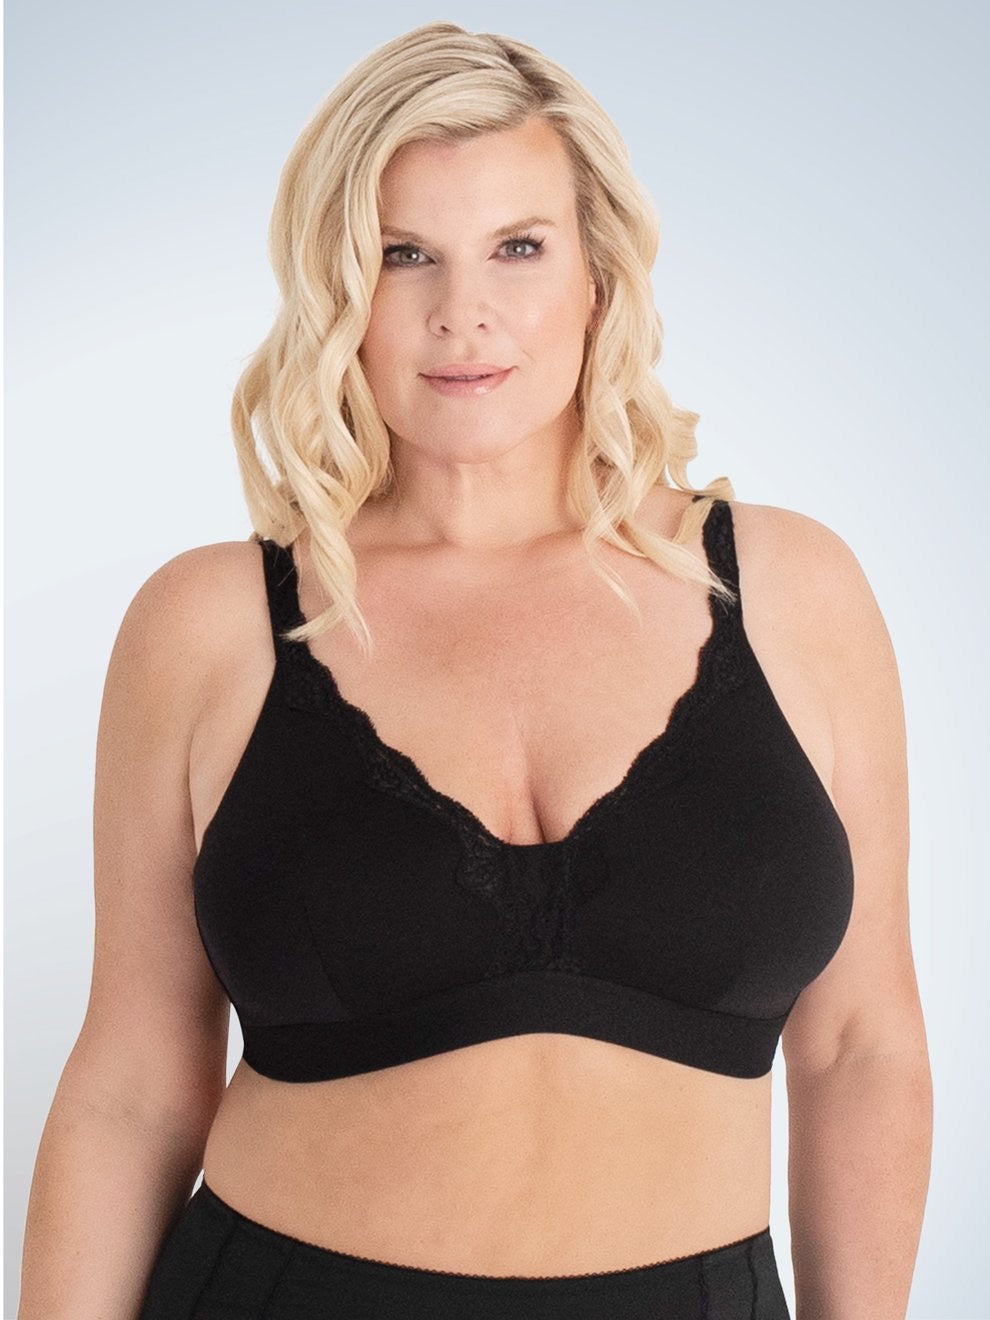 LEADING LADY The Lora Front Closure Support Bra. Lace, Back Smoothing Support  Bras for Women. Wireless, Plus Size Black at  Women's Clothing store